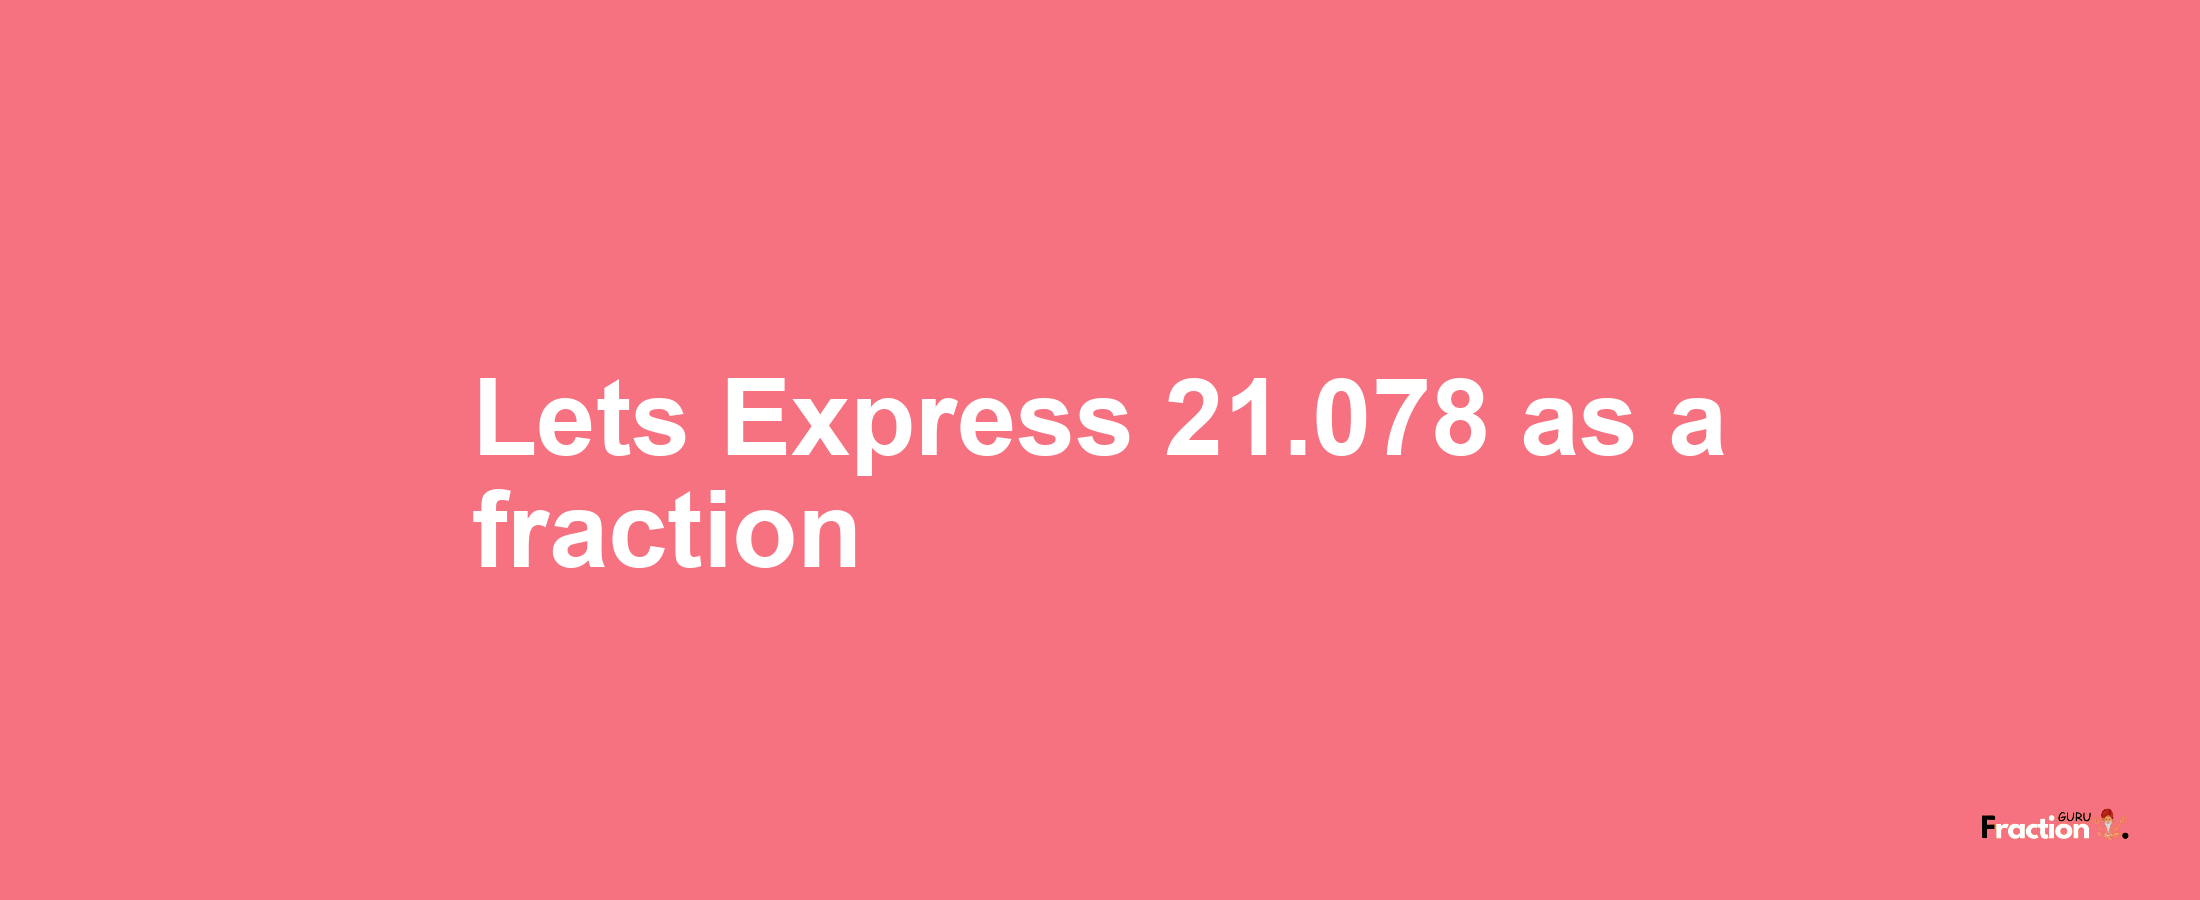 Lets Express 21.078 as afraction